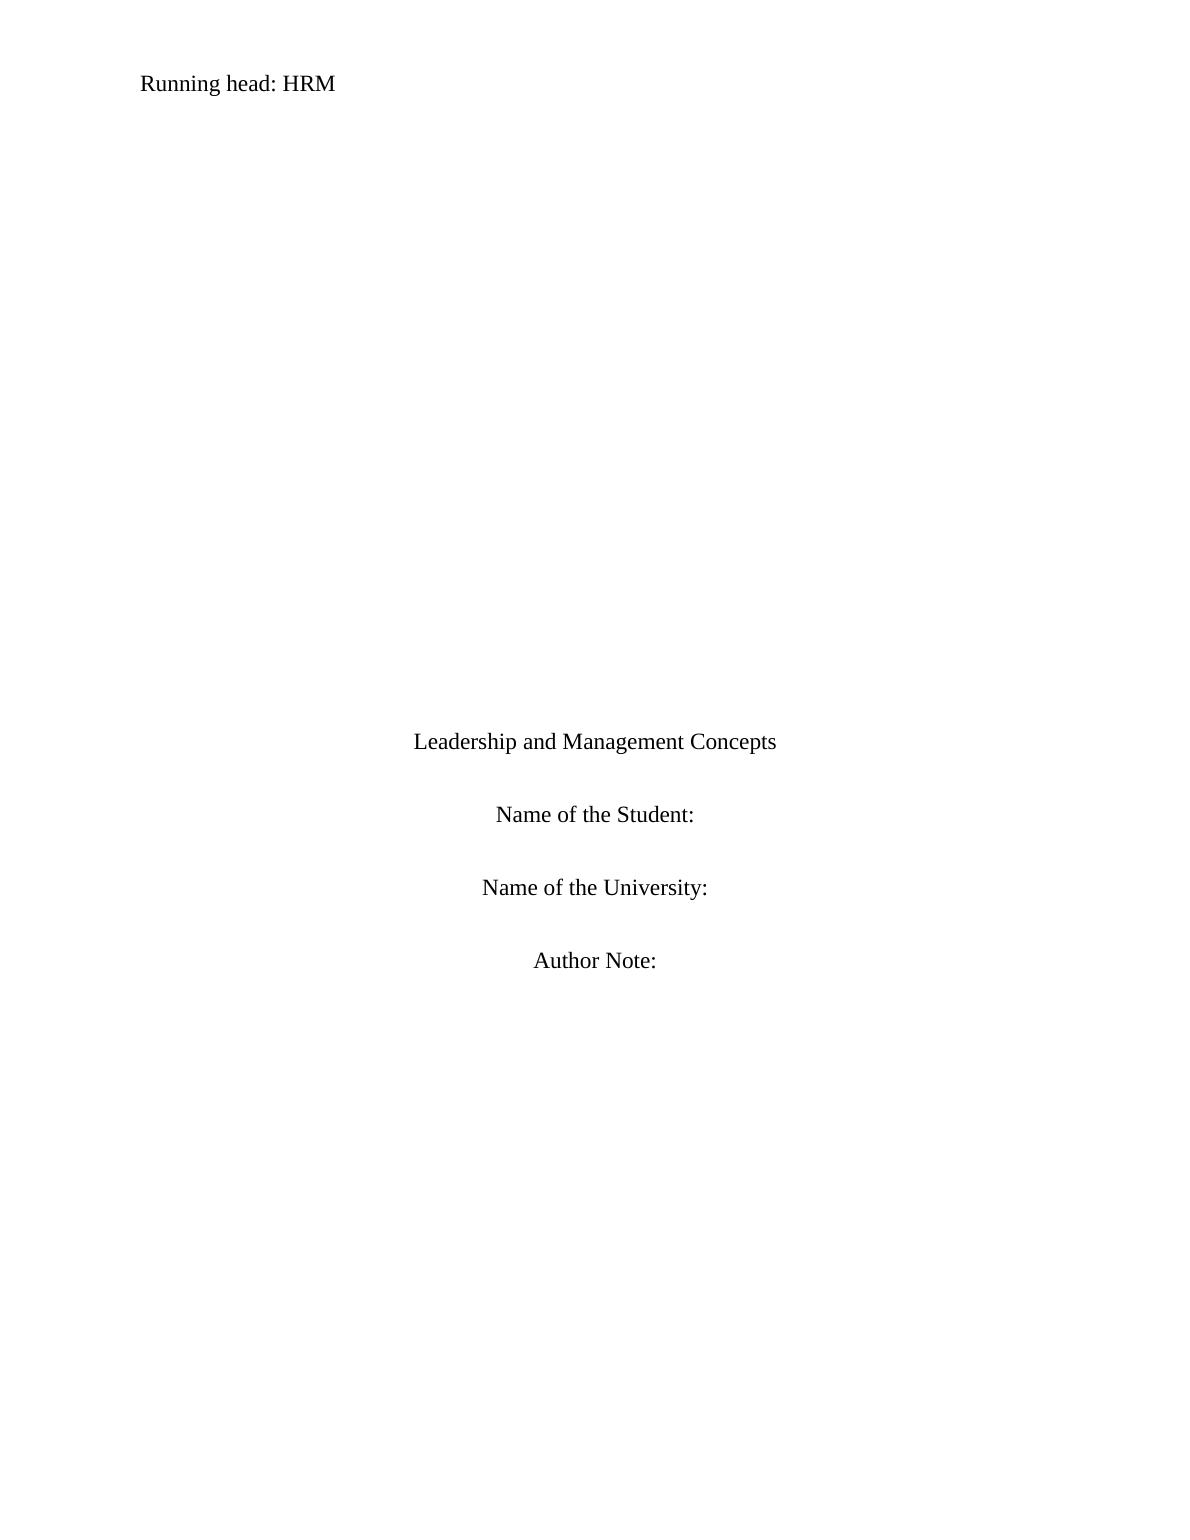 Leadership and Management Concepts - An Overview_1